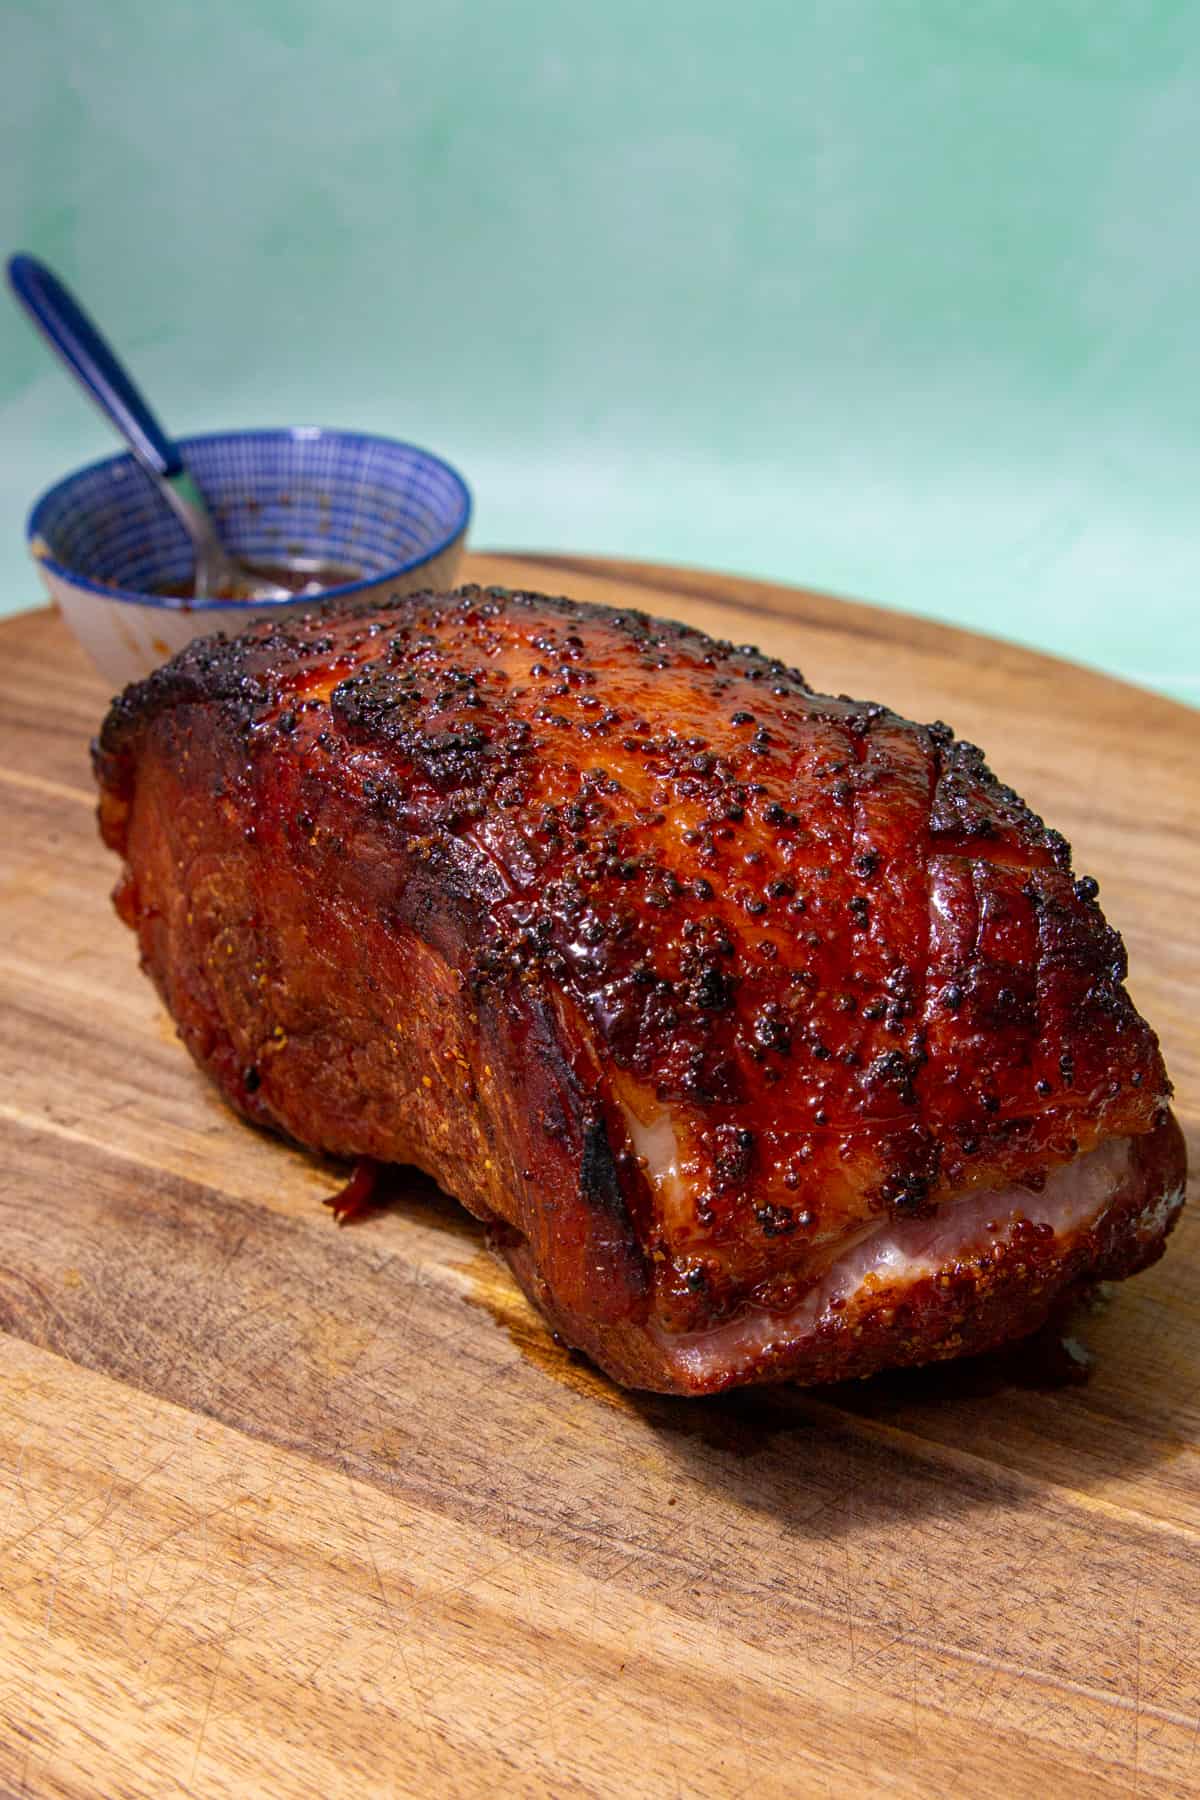 Roasted ham with dark brown glazed topping on a wooden board with a small pot in view behind the ham.